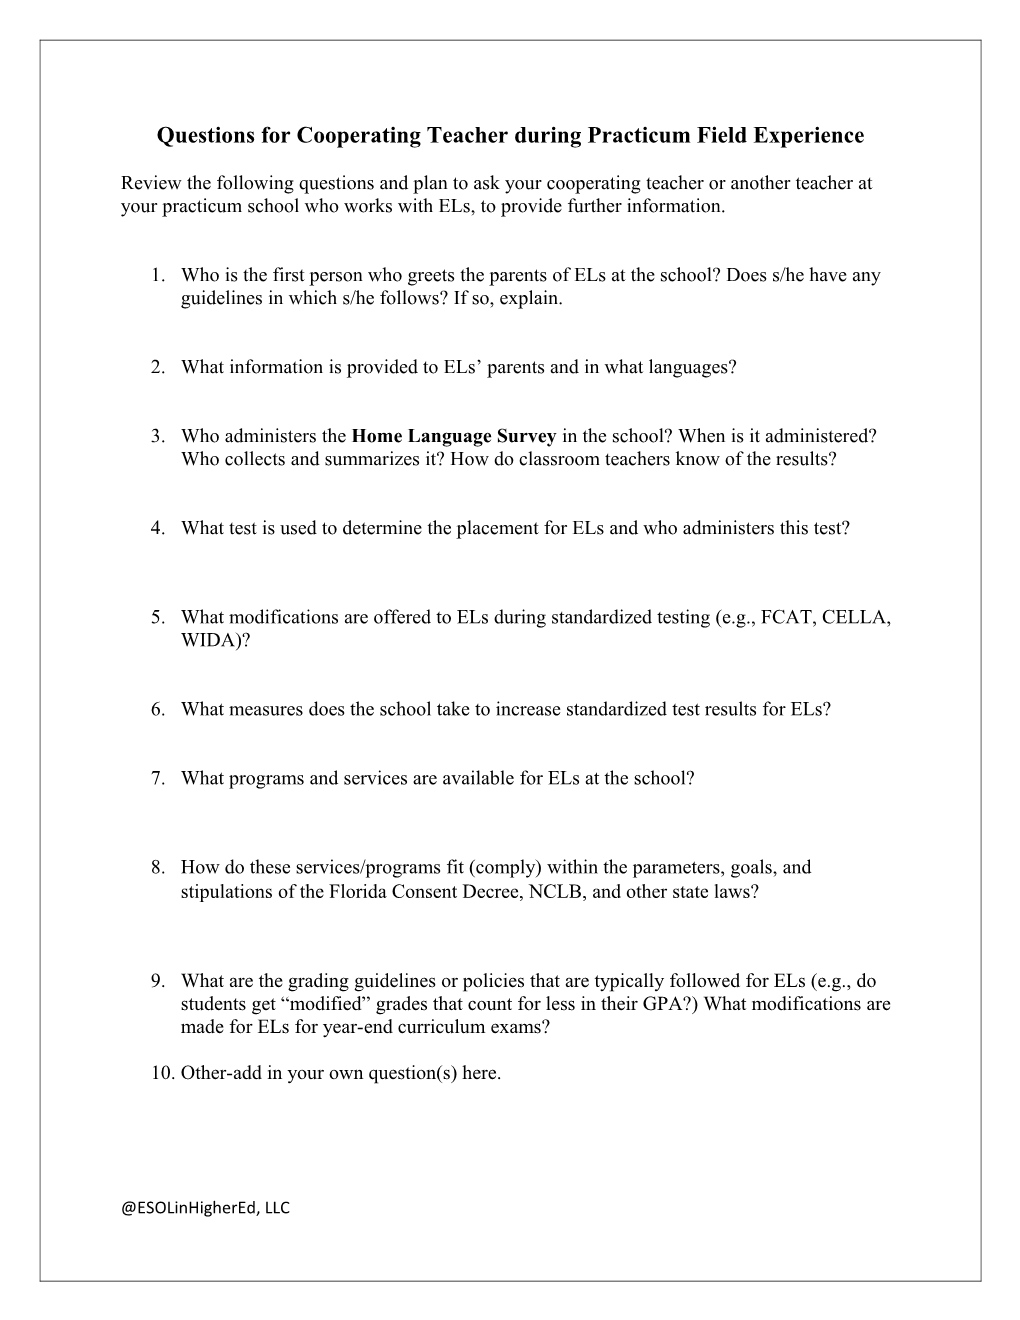 Questions for Cooperating Teacher During Practicum Field Experience